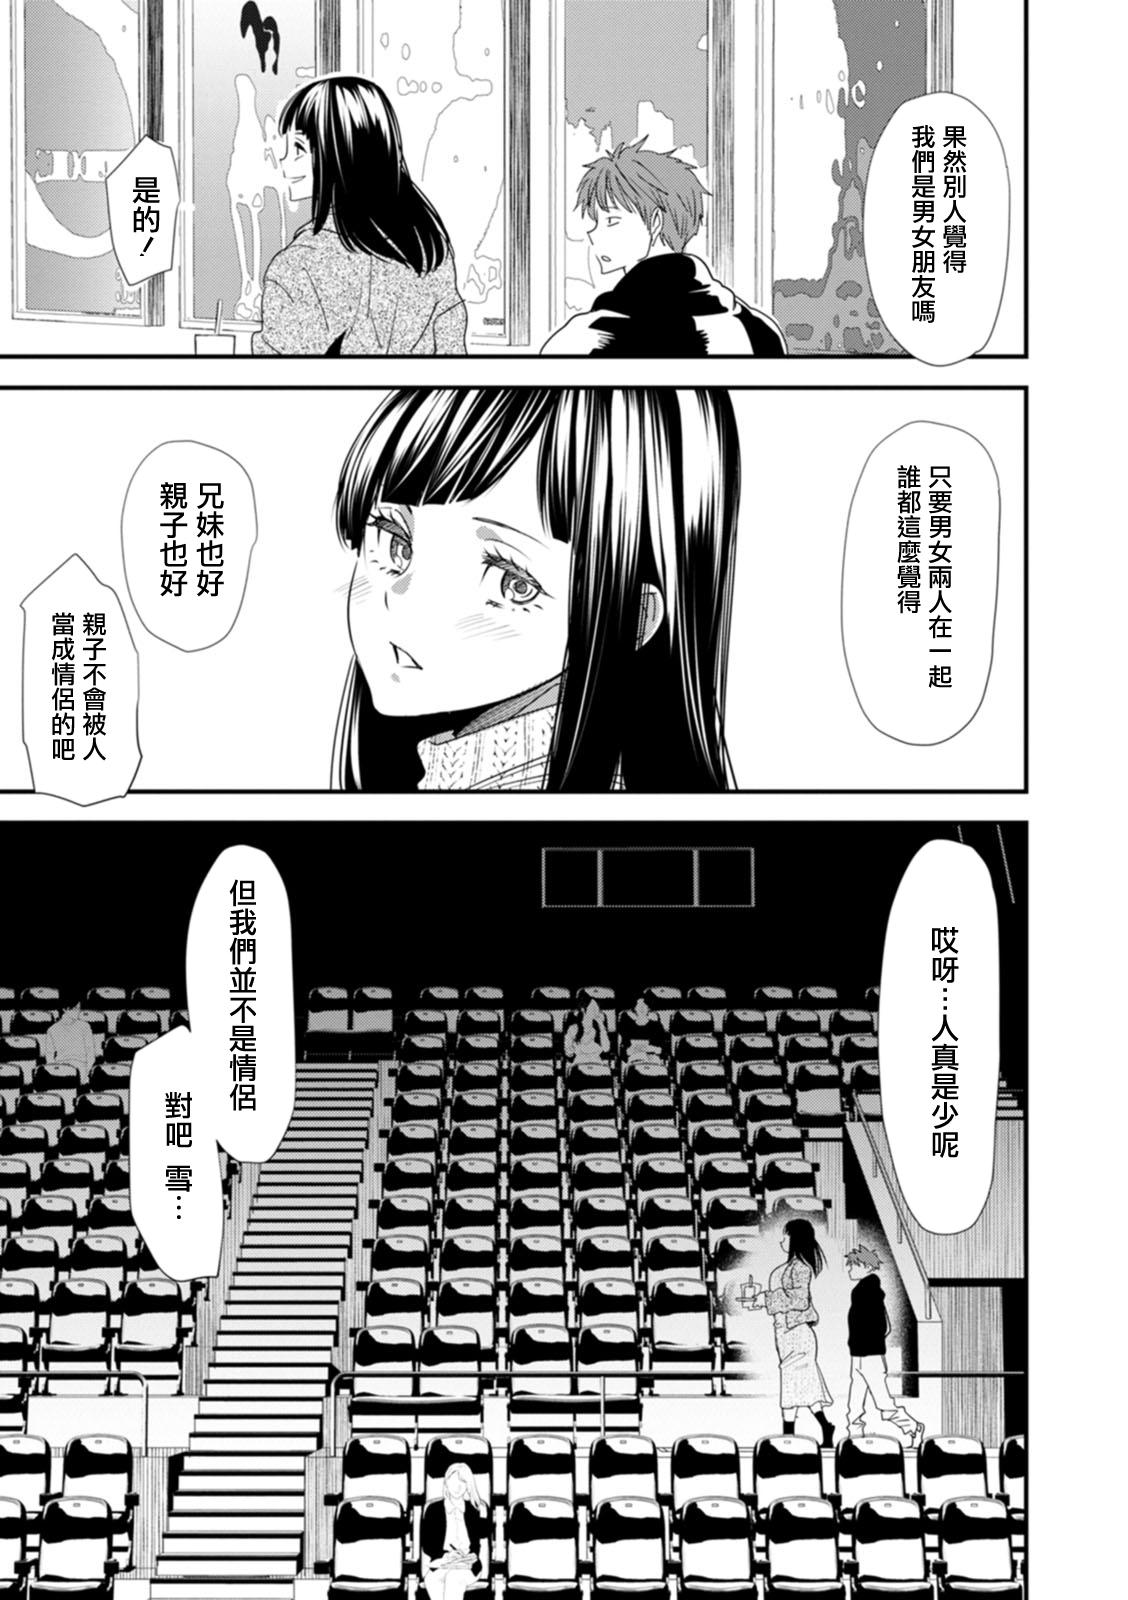 Interracial Inma Joshi Daisei no Yuuutsu - The Melancholy of the Succubus who is a college student Ch. 5 Big Booty - Page 5